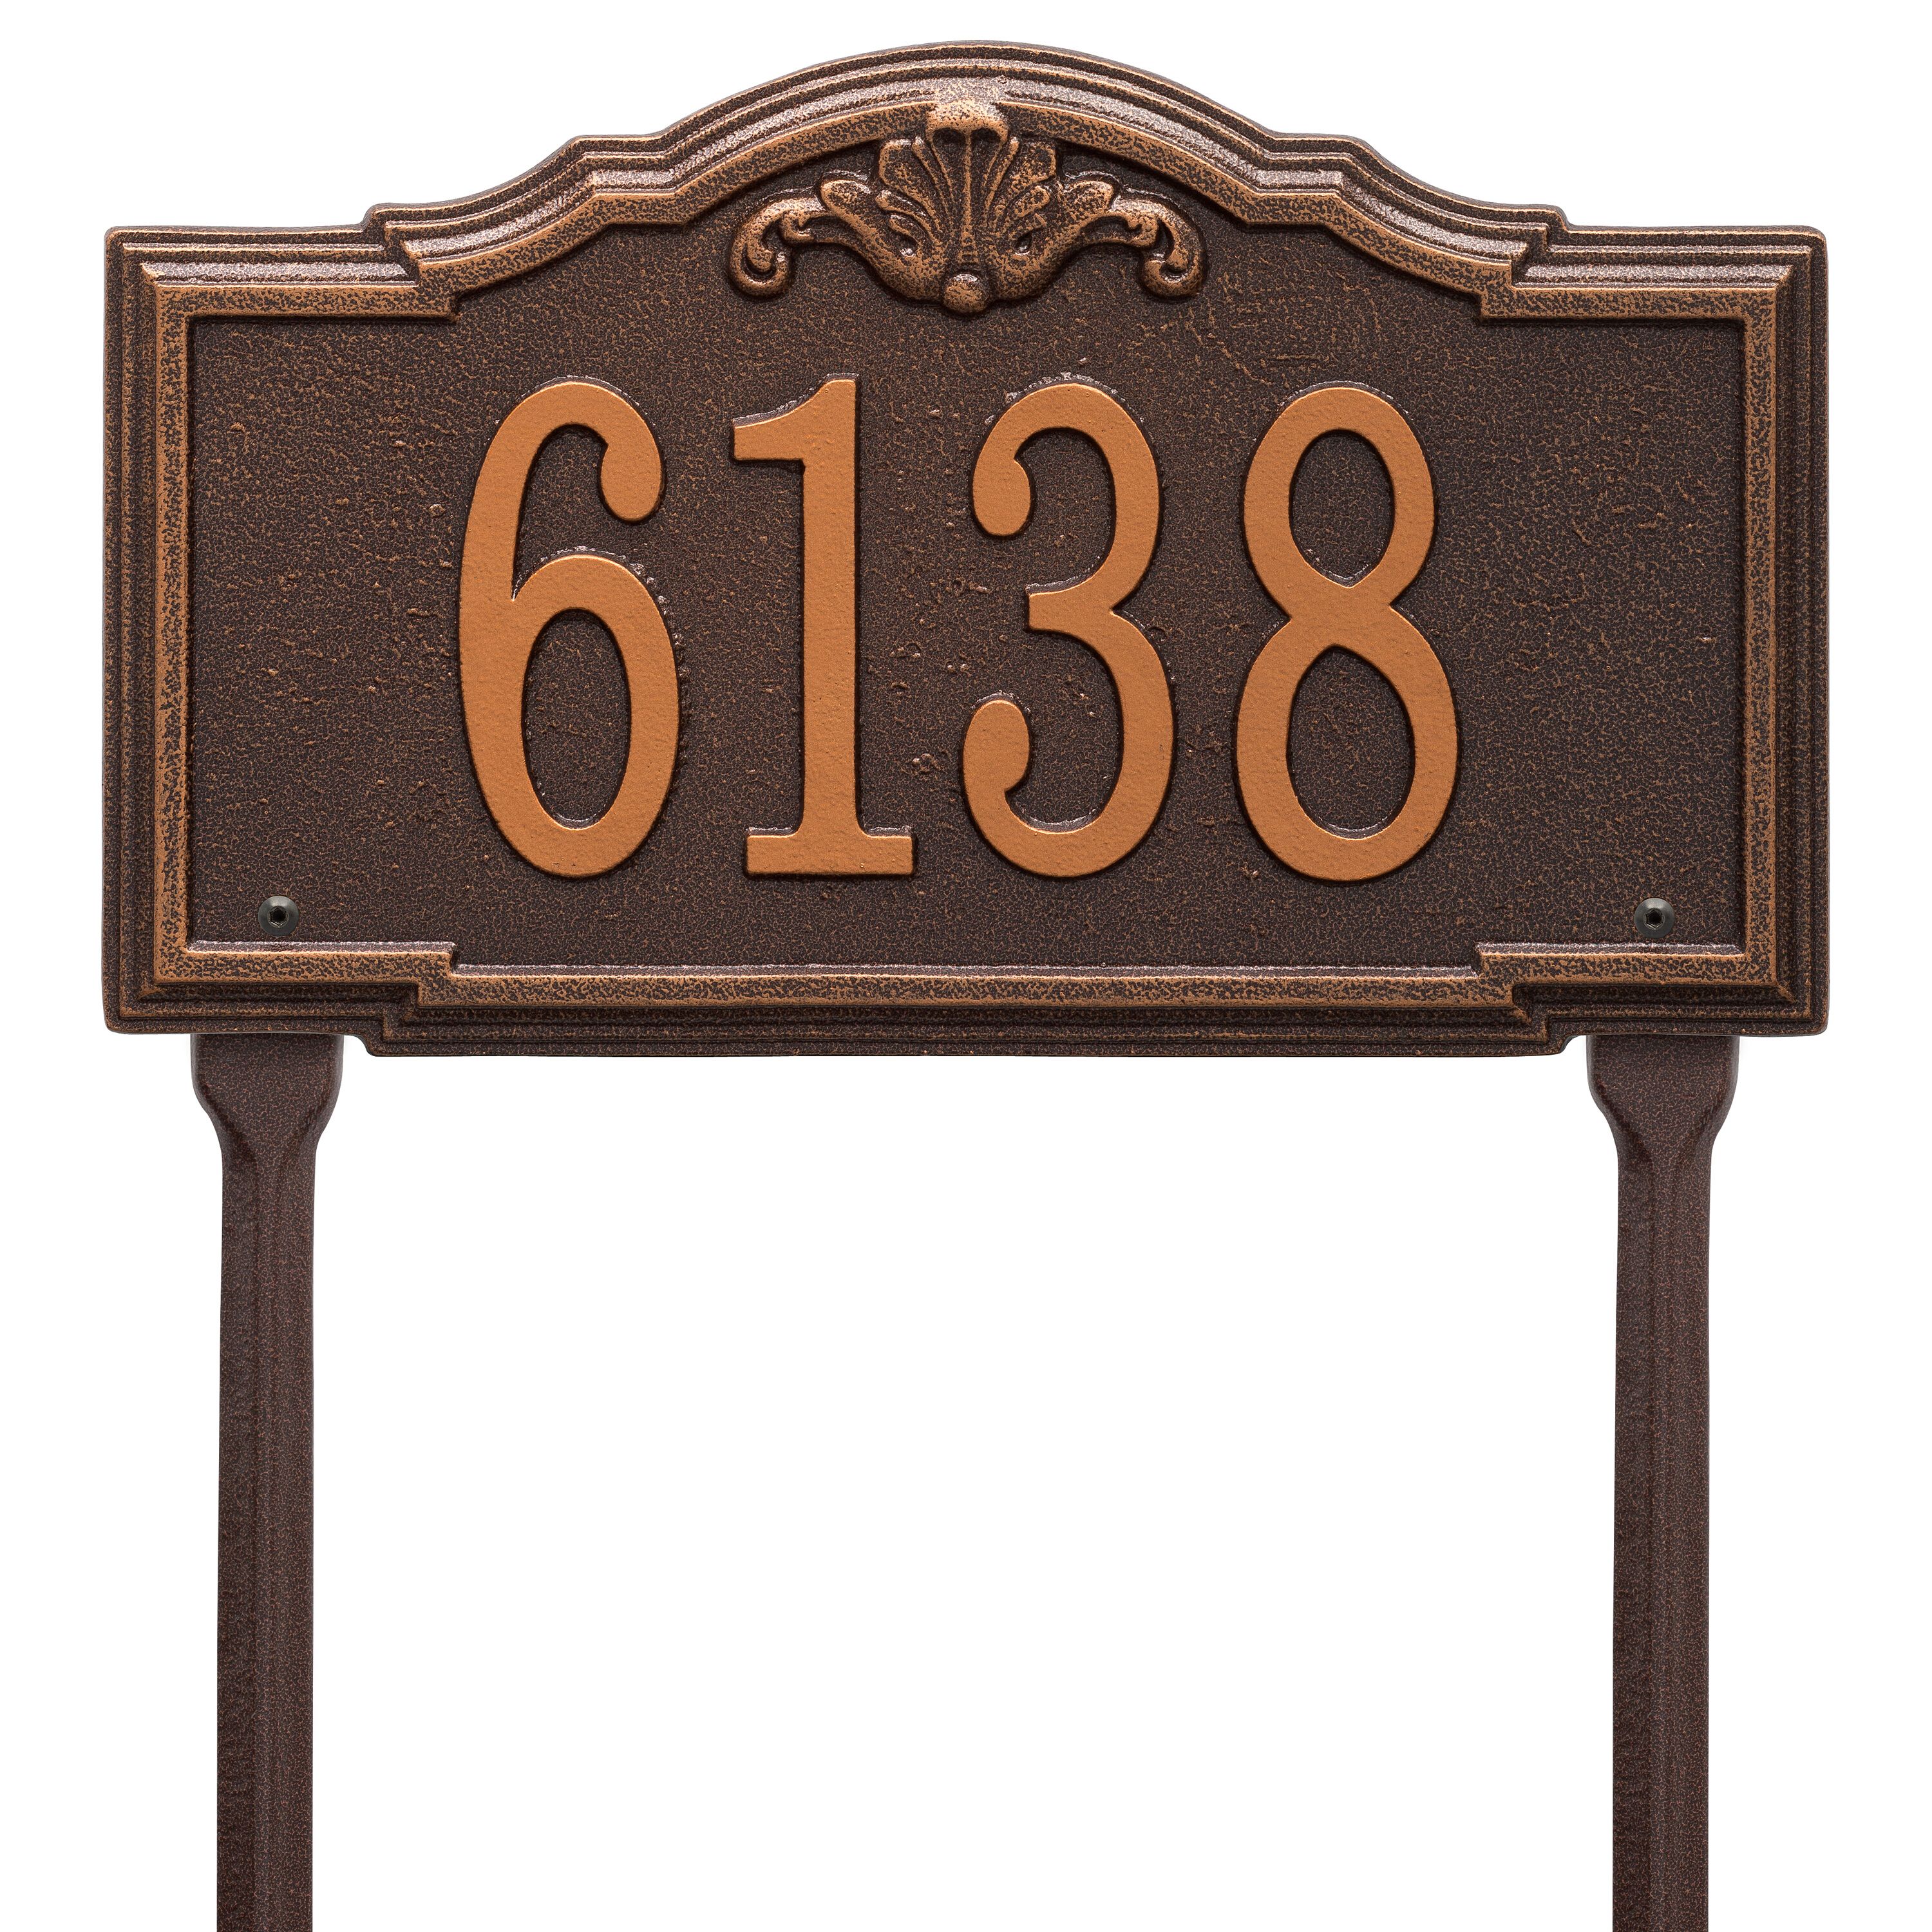 Personalized Gatewood Plaque - Standard - Lawn - 1 Line 